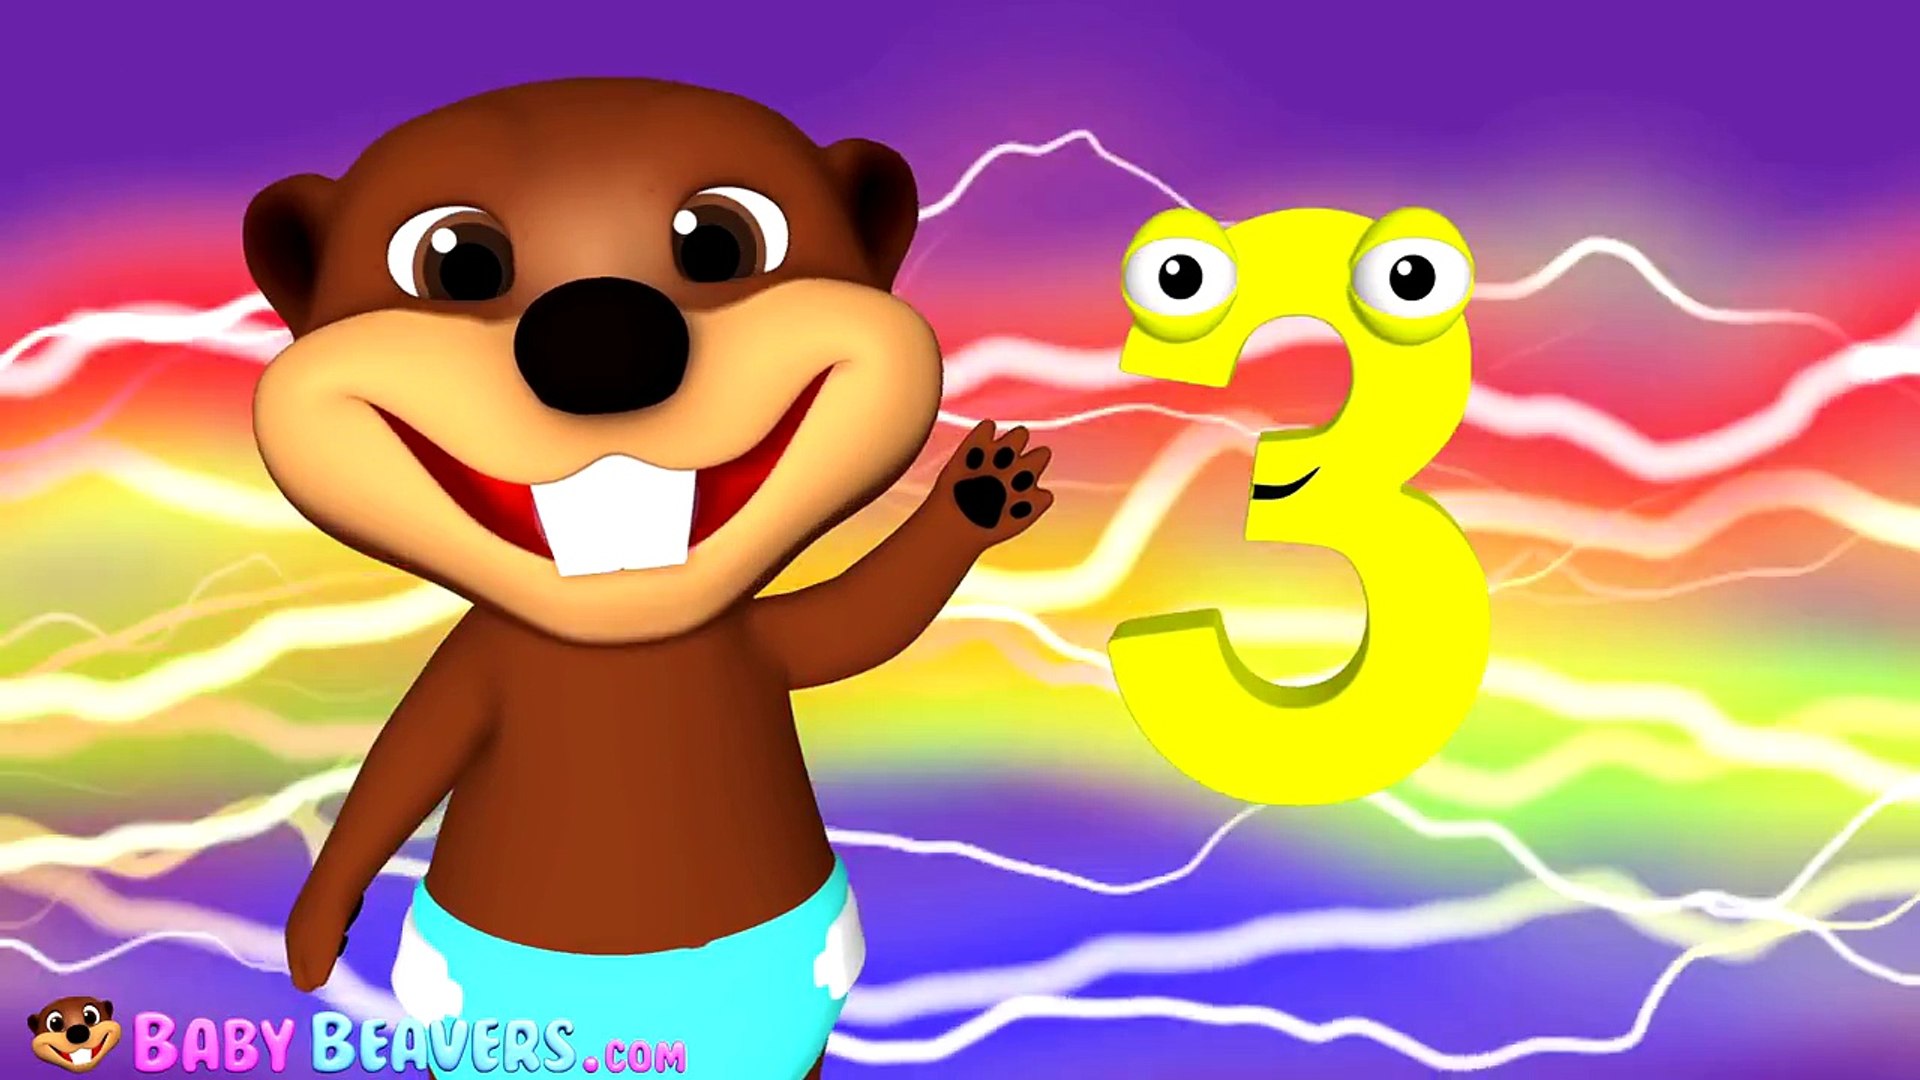 Beavers in Space 30 Minute Collection | Nursery Rhymes, 123s, Busy Beavers Kids Animated Videos